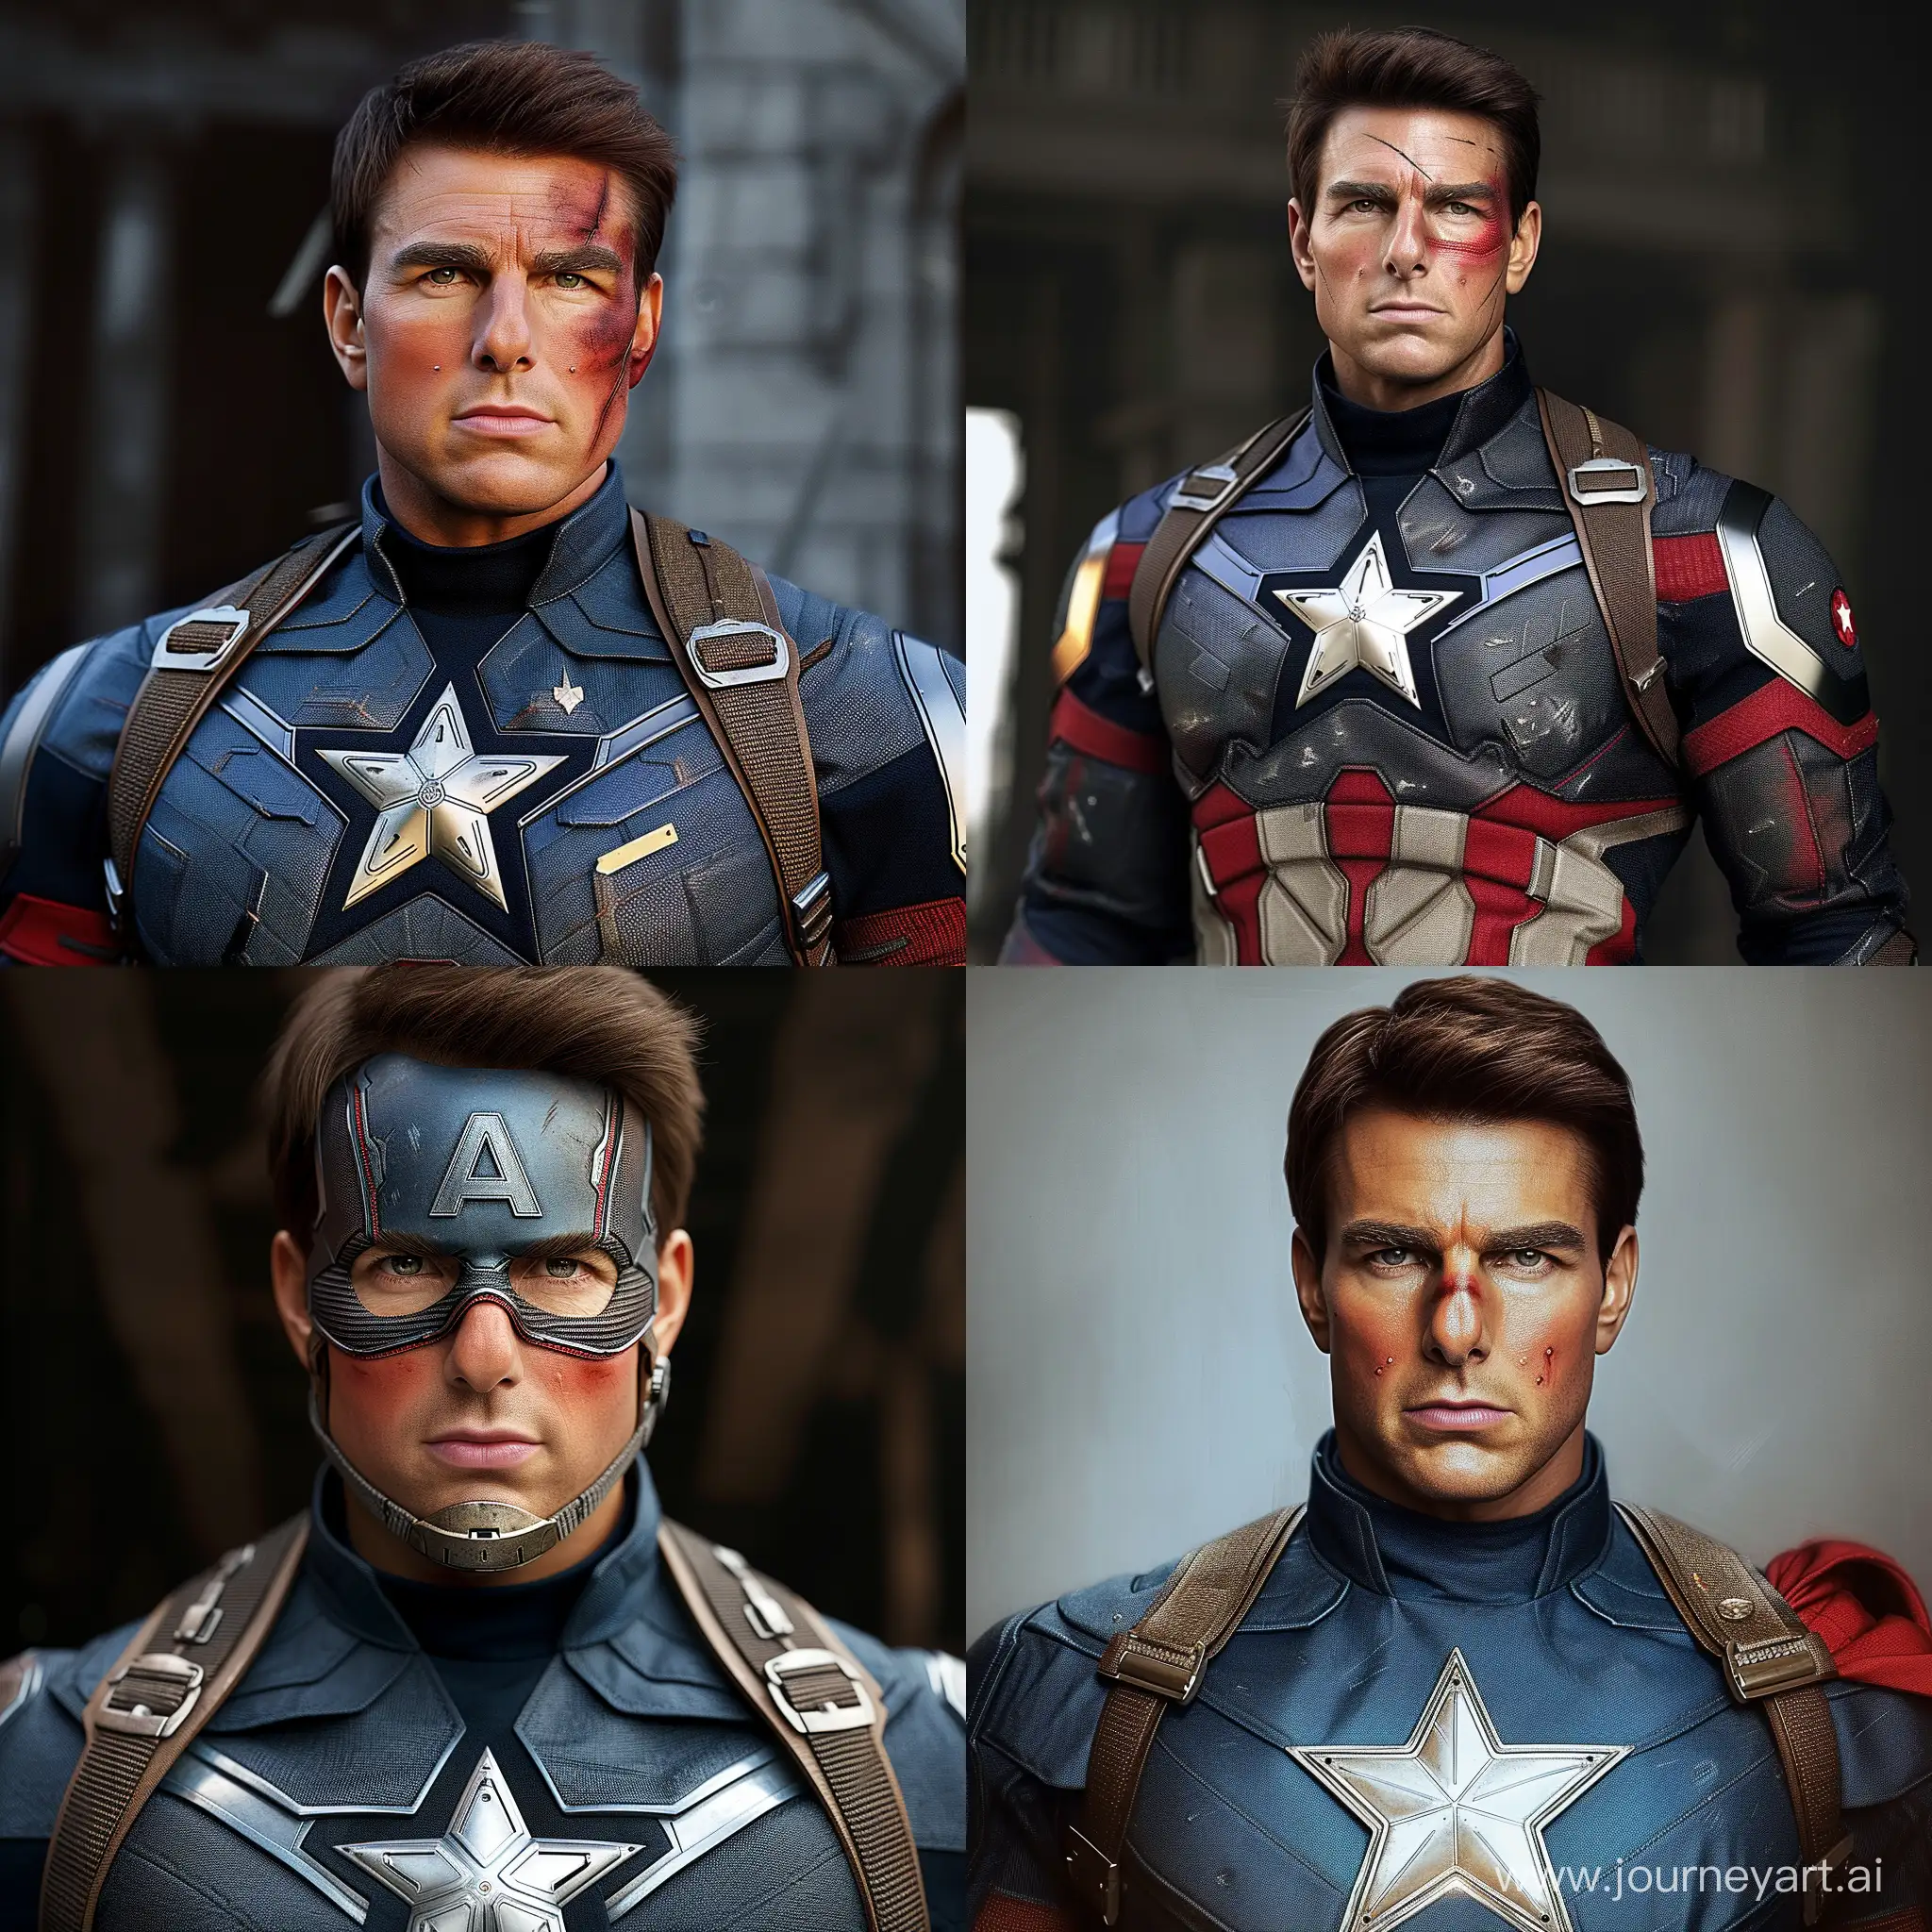 Tom-Cruise-Captures-the-Essence-of-Captain-America-in-Stunning-Realistic-High-Graphics